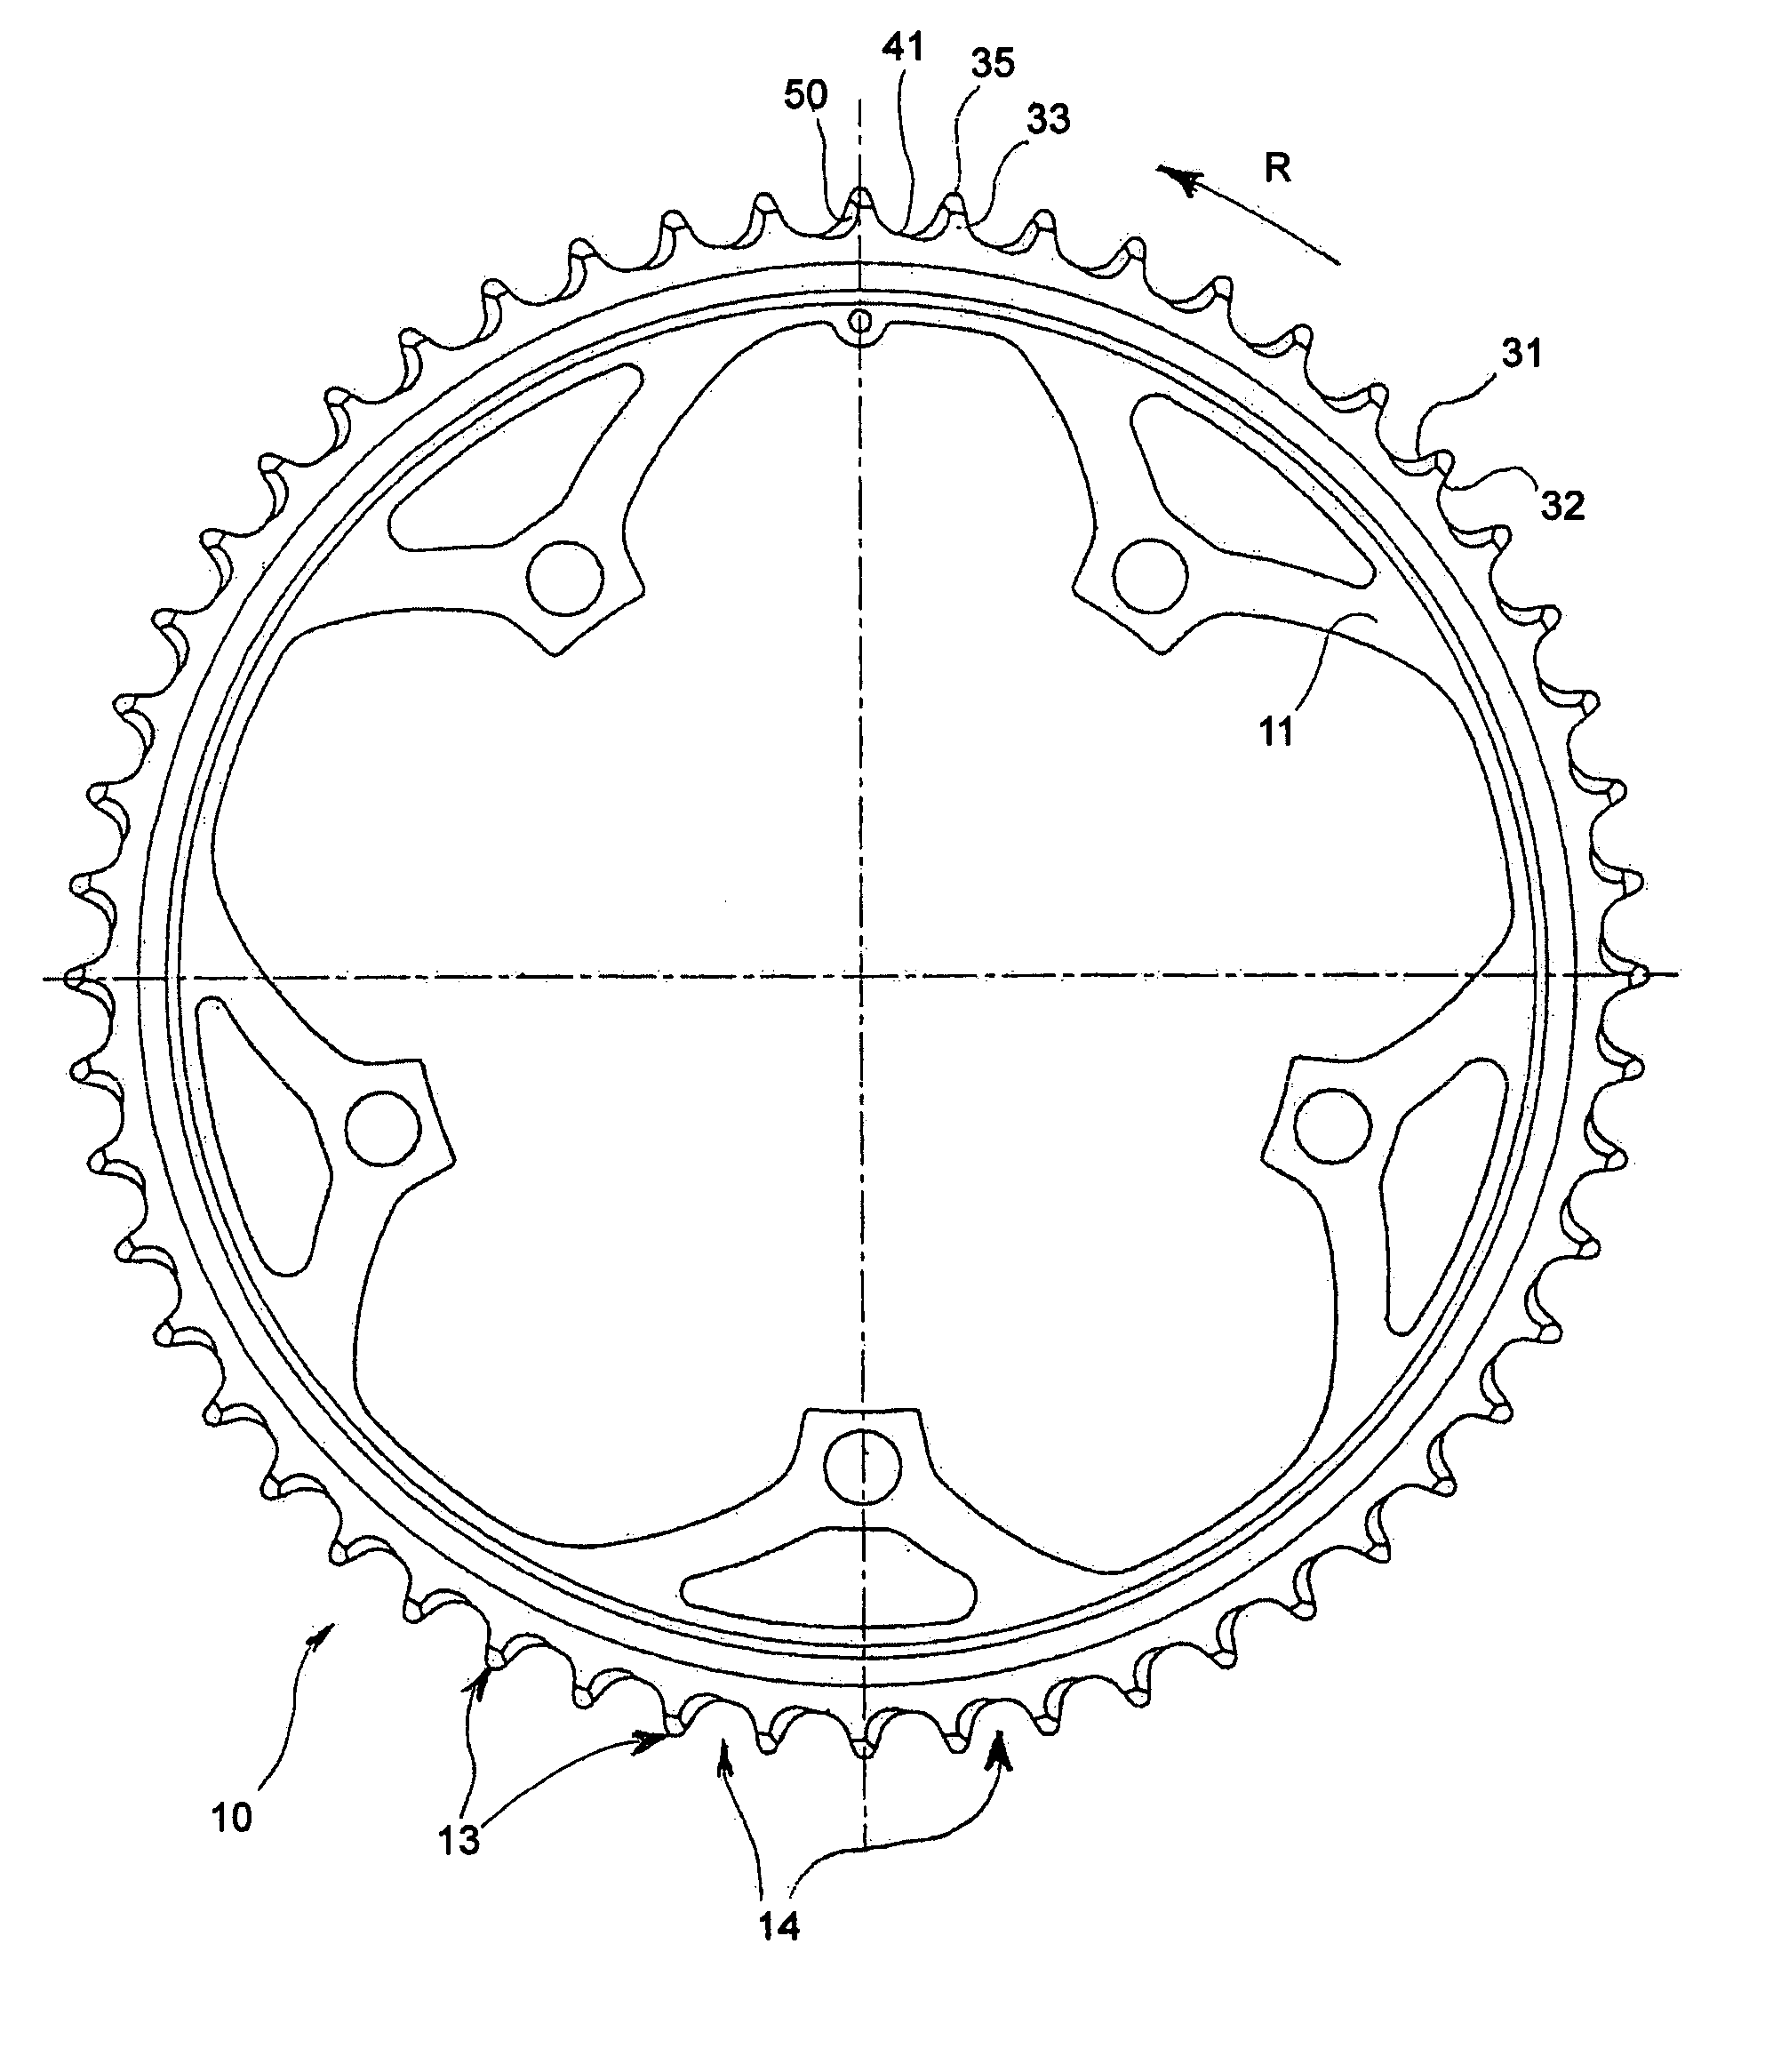 Sprocket of a chain transmission for a bicycle